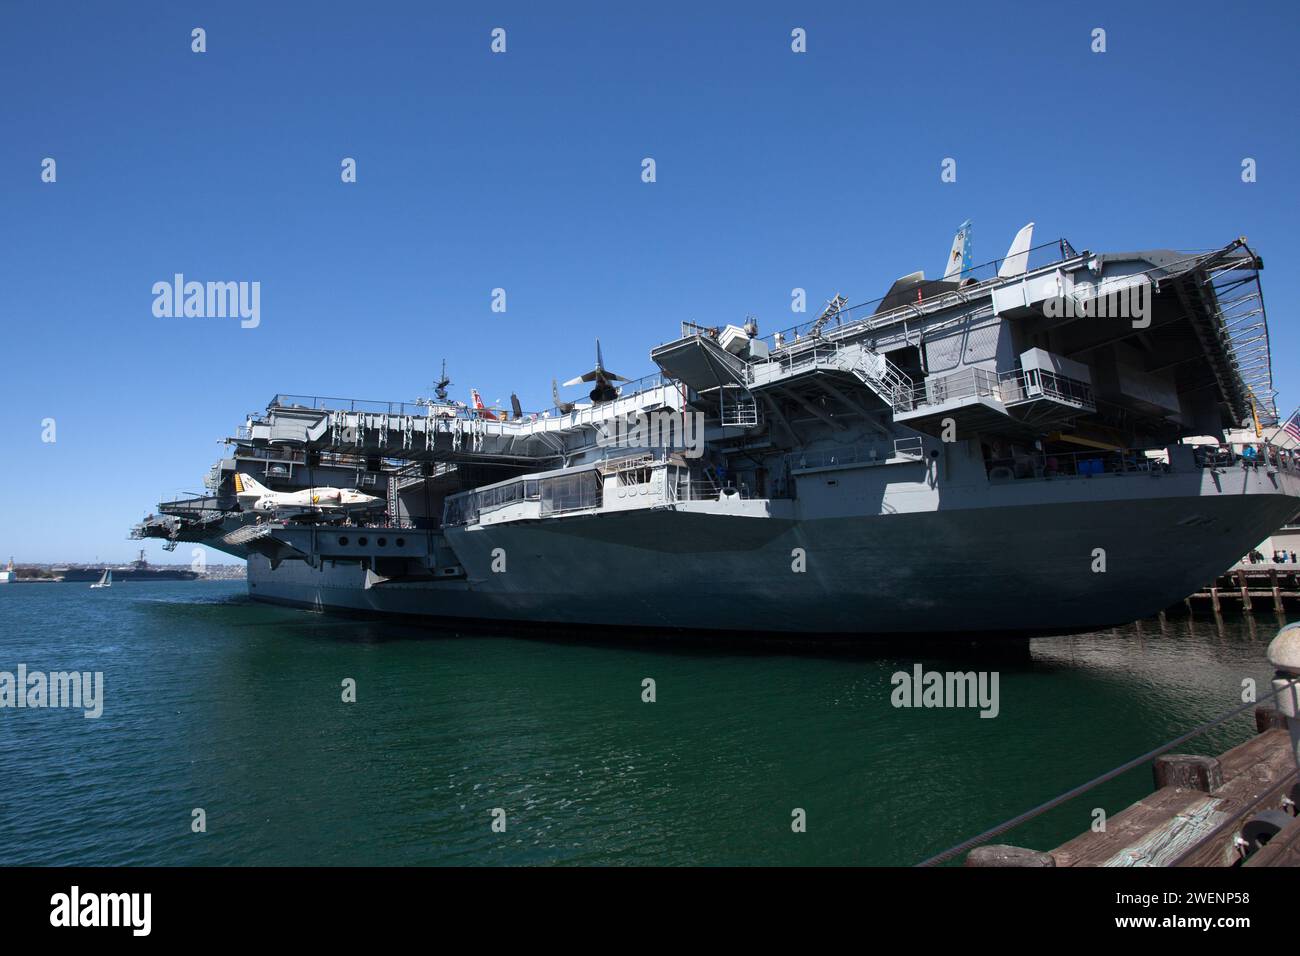 USS Midway (CVB/CVA/CV-41) is an aircraft carrier, formerly of the United States Navy, the lead ship of her class. Now a museum ship in San Diego. Stock Photo